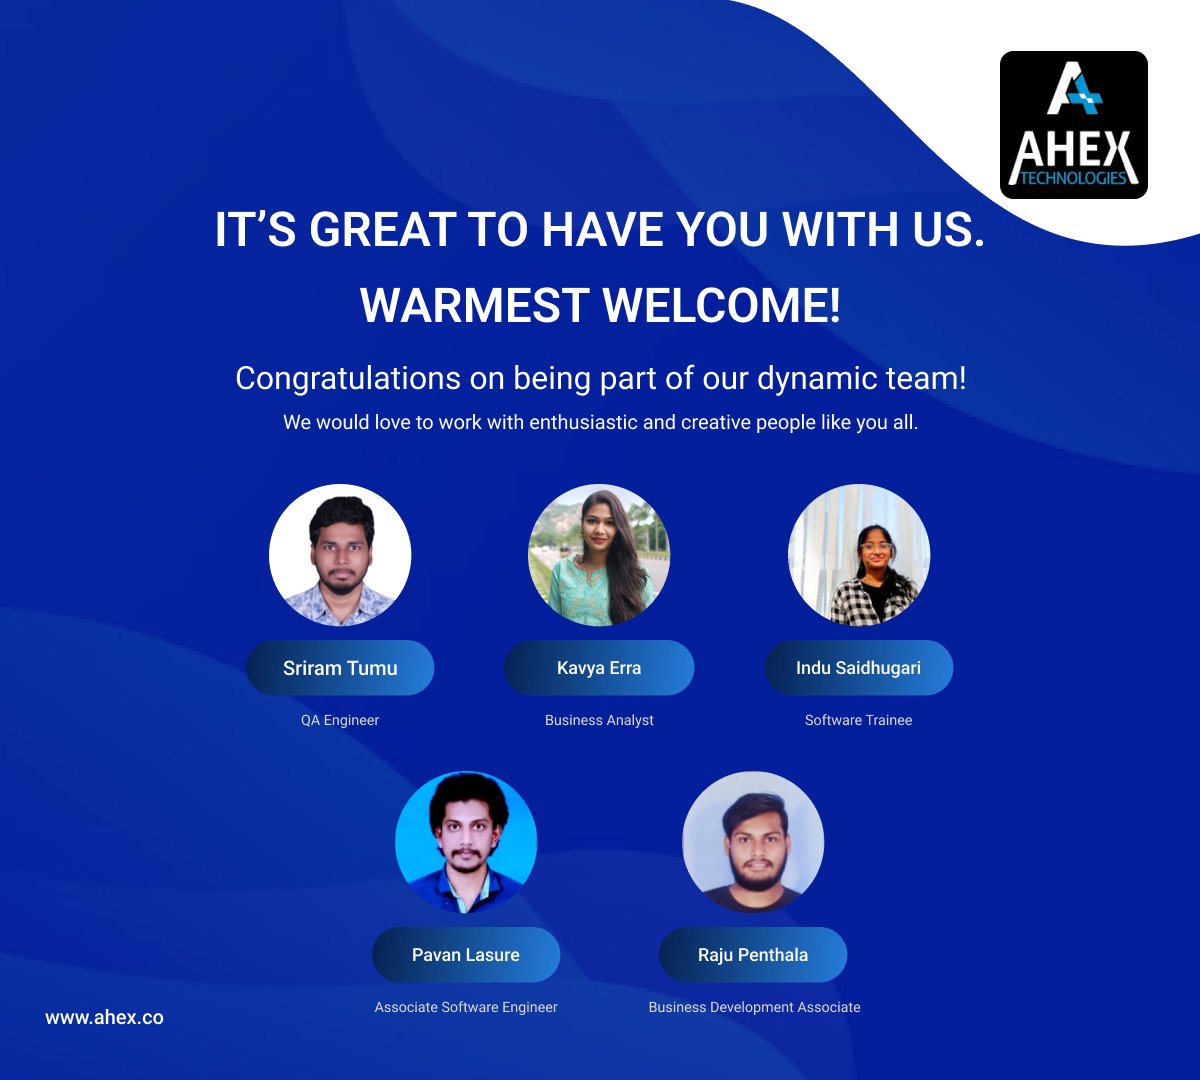 Welcome to the Ahex Technologies team! We're excited to have you on board. Your skills and enthusiasm will be valuable assets. Together, we'll achieve great things. Here's to a successful and fulfilling journey ahead!

#newemployees #newjoinee #newtalent